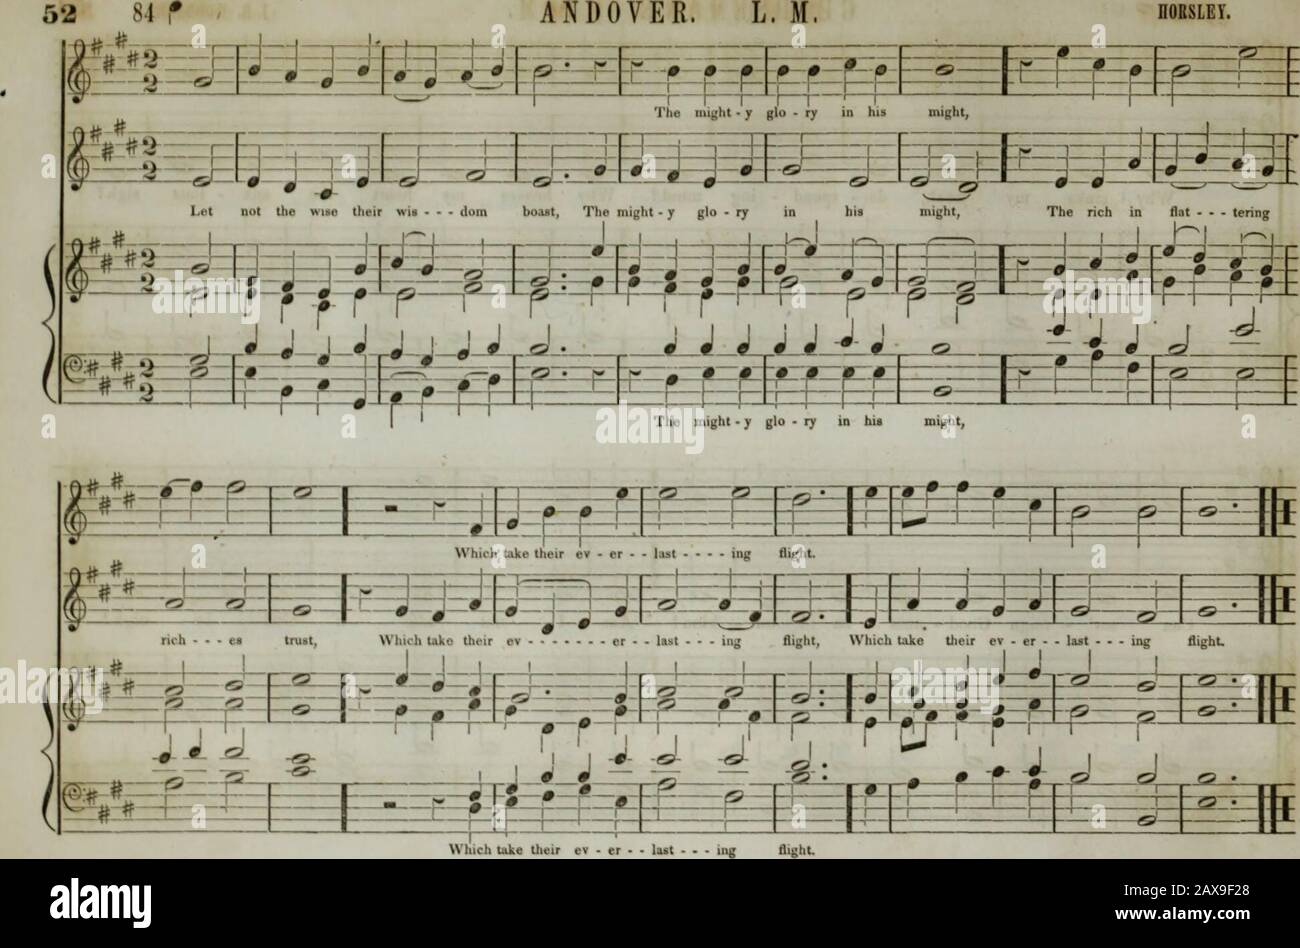 The Boston Musical Education Society's collection of church music : consisting of original psalm and hymn tunes, select pieces, chants, &c.; including compositions adapted to the service of the Protestant Episcopal Church . HAMILTON, L. M. I. B. WOODBrRT. 53 #» Up to the Lord, who reigns on I ! 1 And views the na - tions from a - - far, Let ±-f. — last - ing praises * * * And tell how large his bounties are. I A lif f1 jtfc if. tvf.x 1 ffTOi ^ f11 r I Ml I 111 ! ! ! ! I ! ! if. ! i I Stock Photo